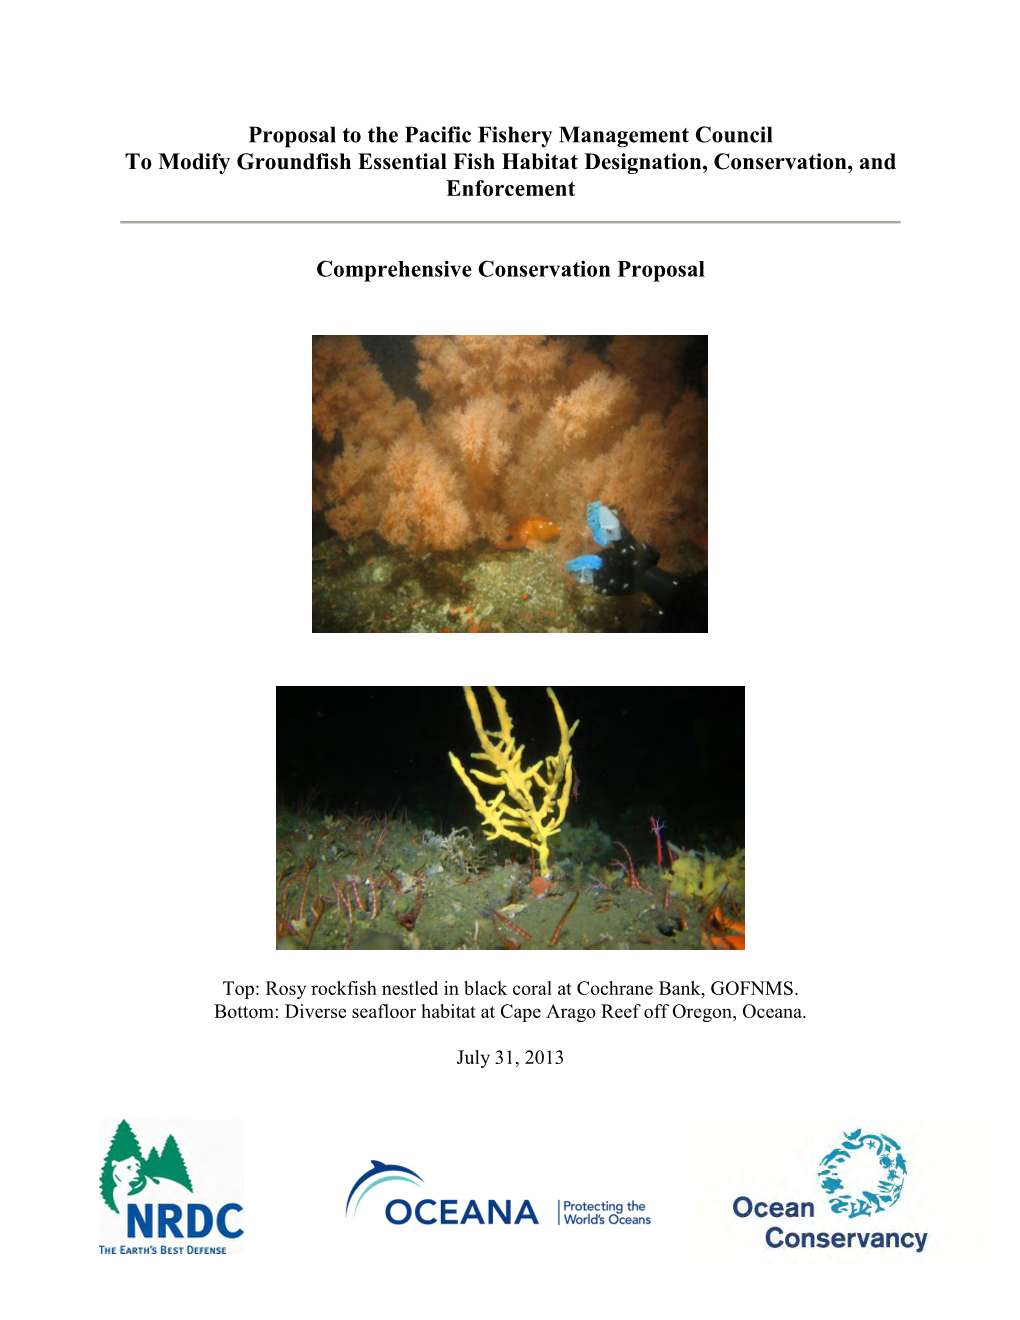 Proposal to the Pacific Fishery Management Council to Modify Groundfish Essential Fish Habitat Designation, Conservation, and Enforcement